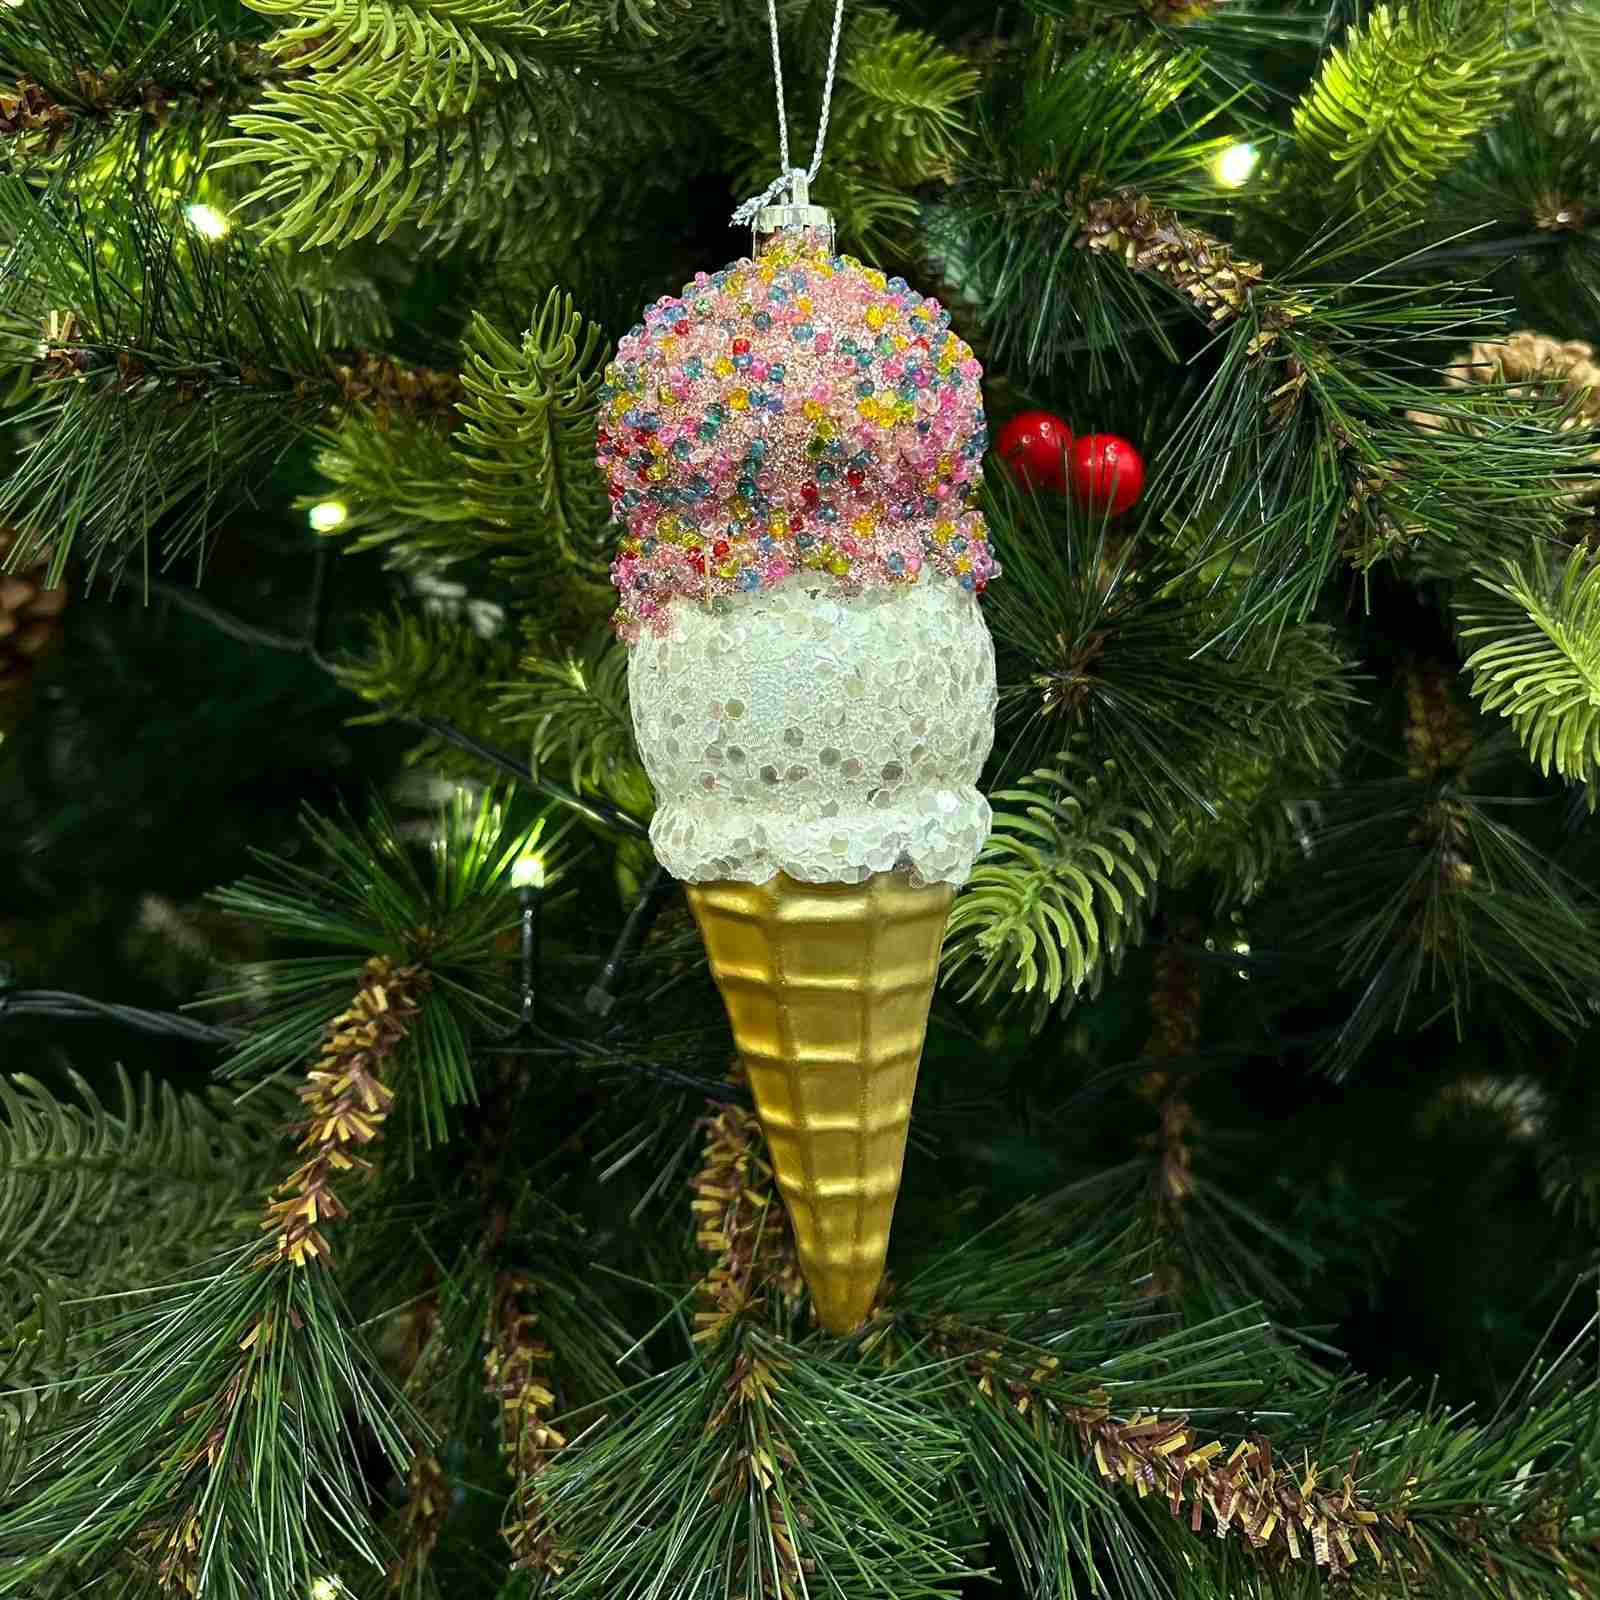 Ice Cream with Sprinkles Ornament